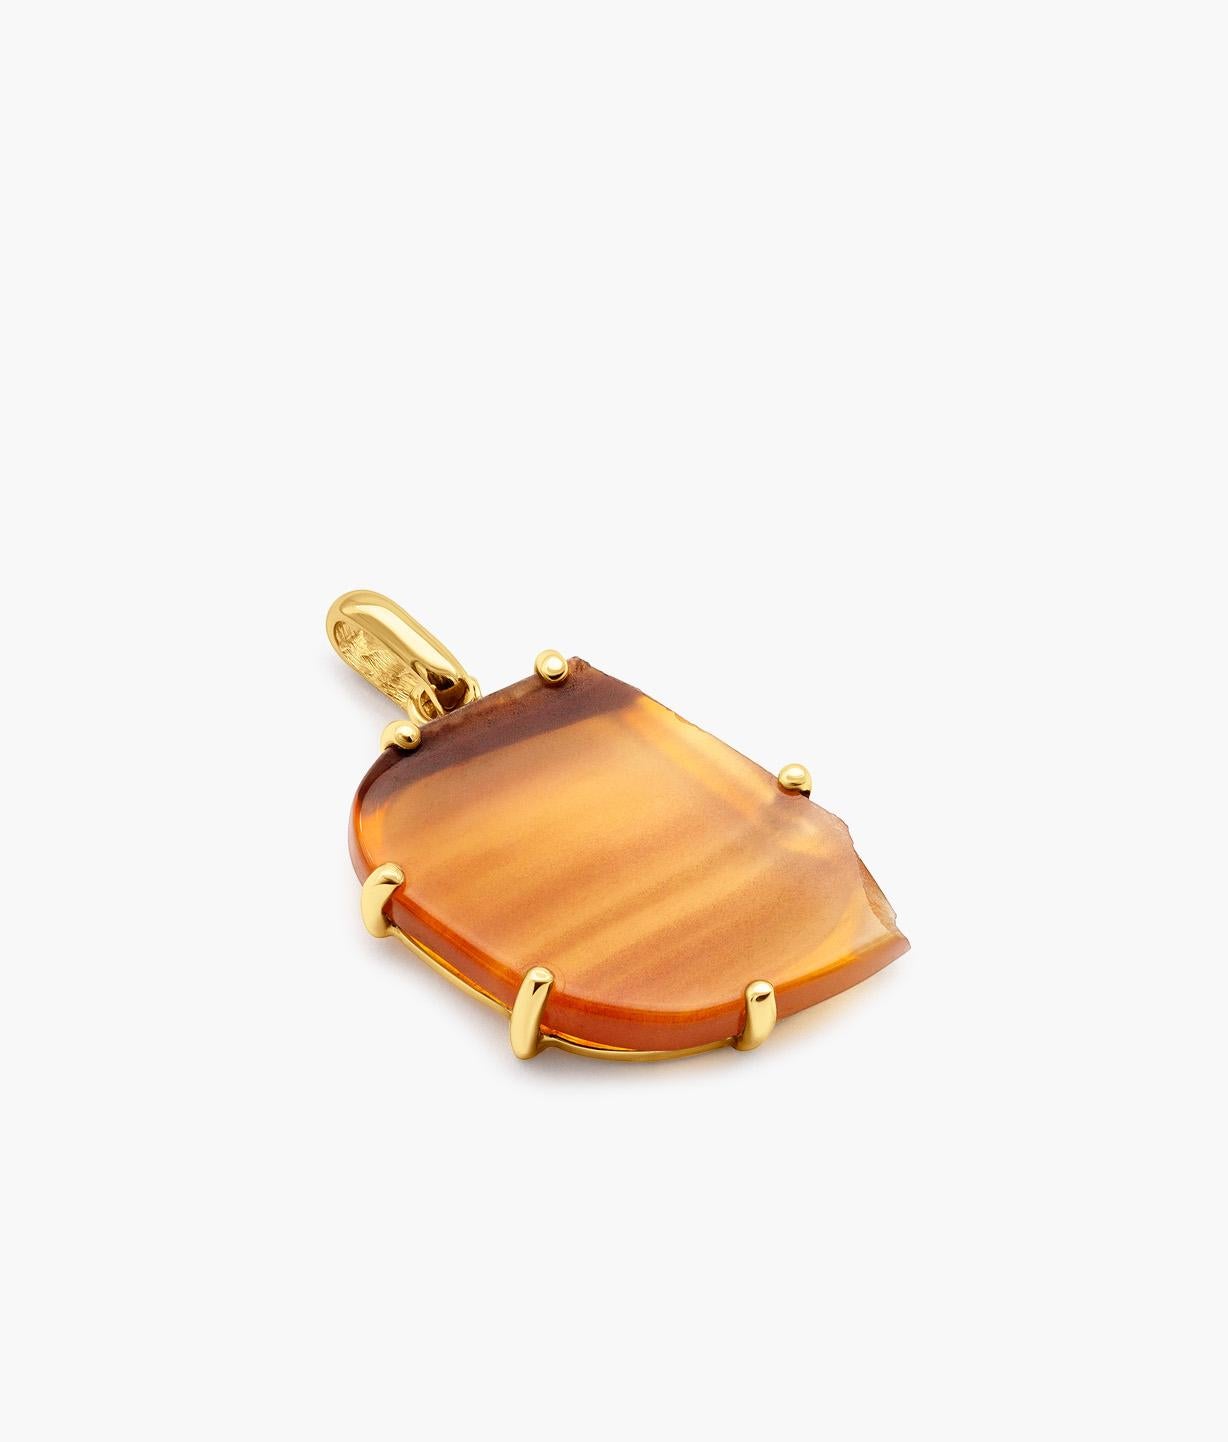 One-of-a-kind cornelian charm. Hand-made assembled on a 14-karat gold frame and recovered from our broken gems archives.

This pendant celebrates the beauty in imperfection.

Gemstones: Cornelian / Dimensions: 18 x 15 mm / SUOT 585 engraving.